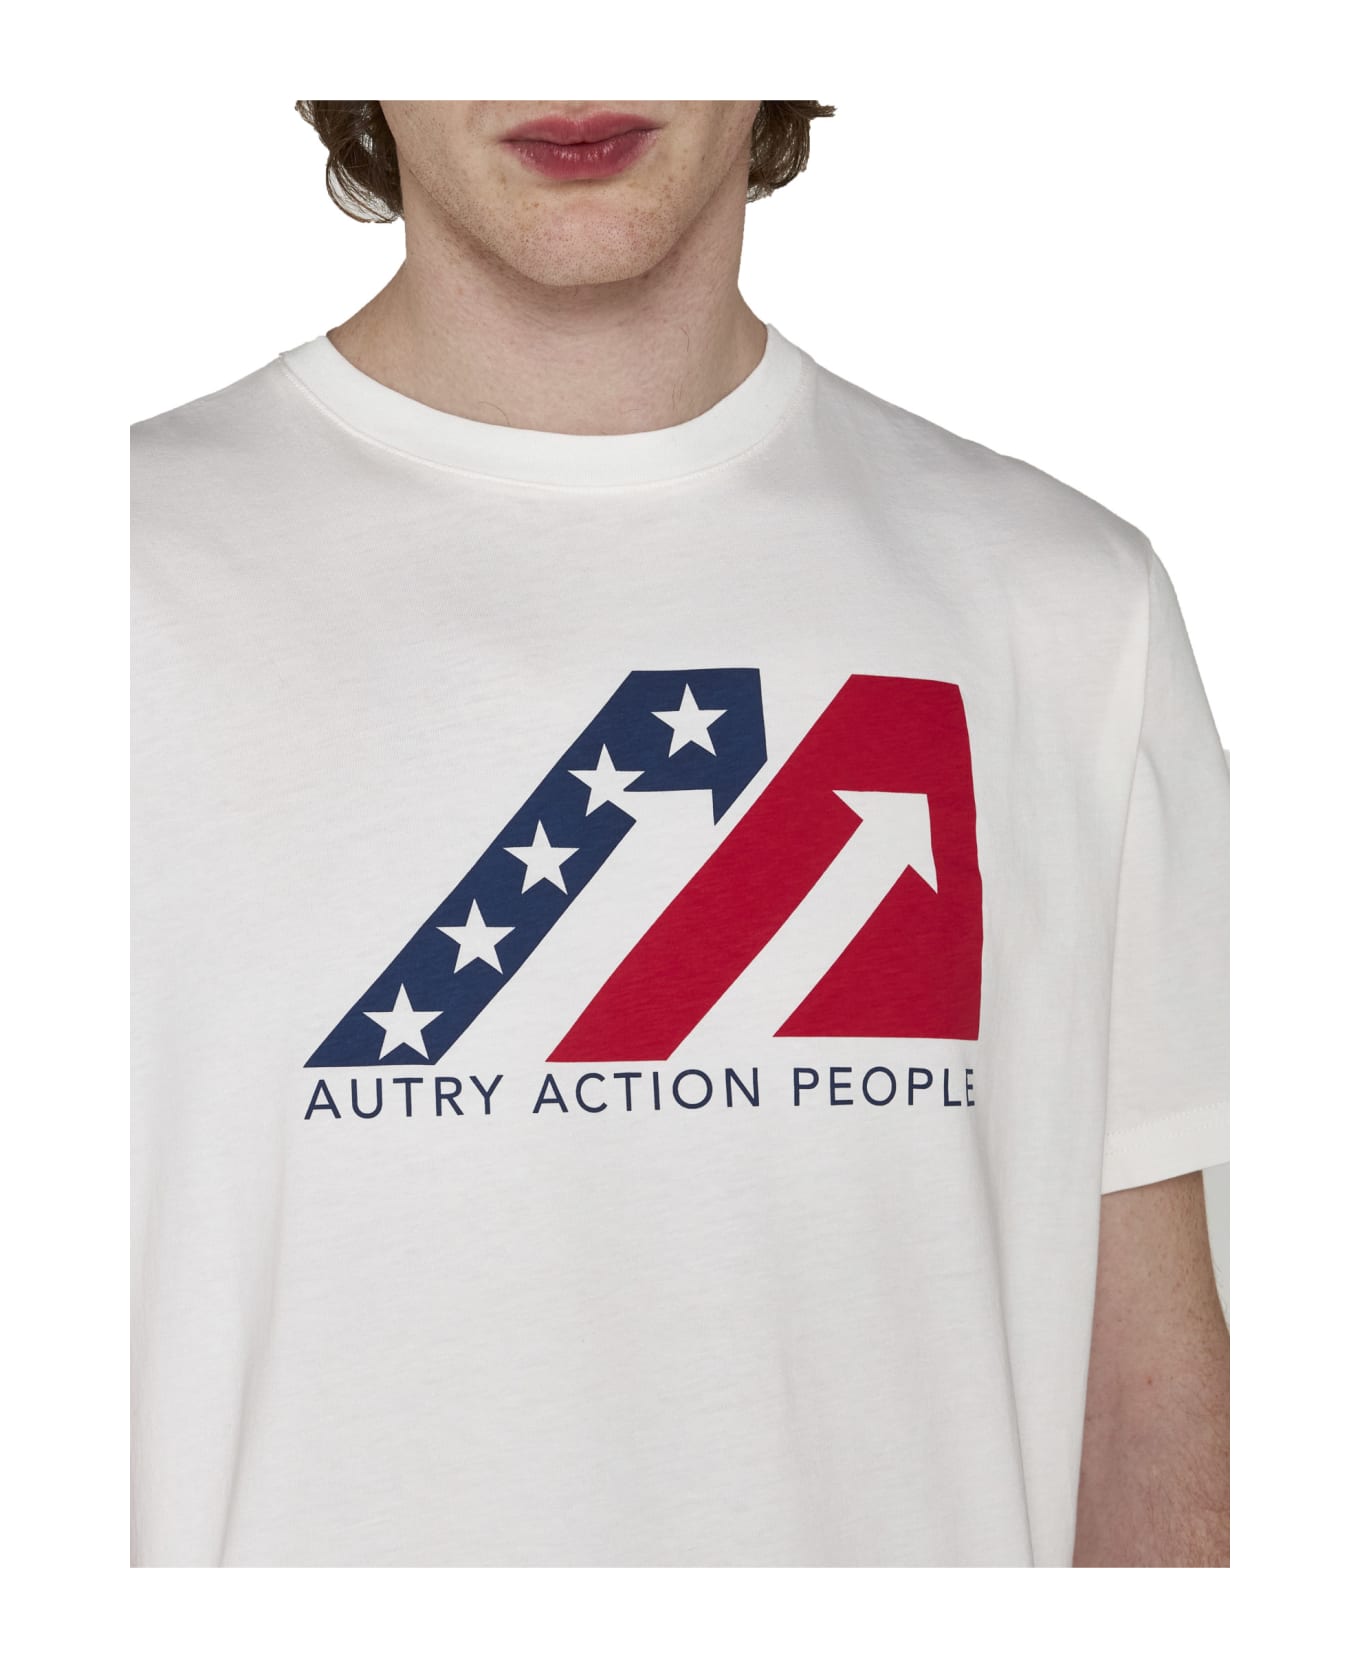 Autry T-Shirt - Action white